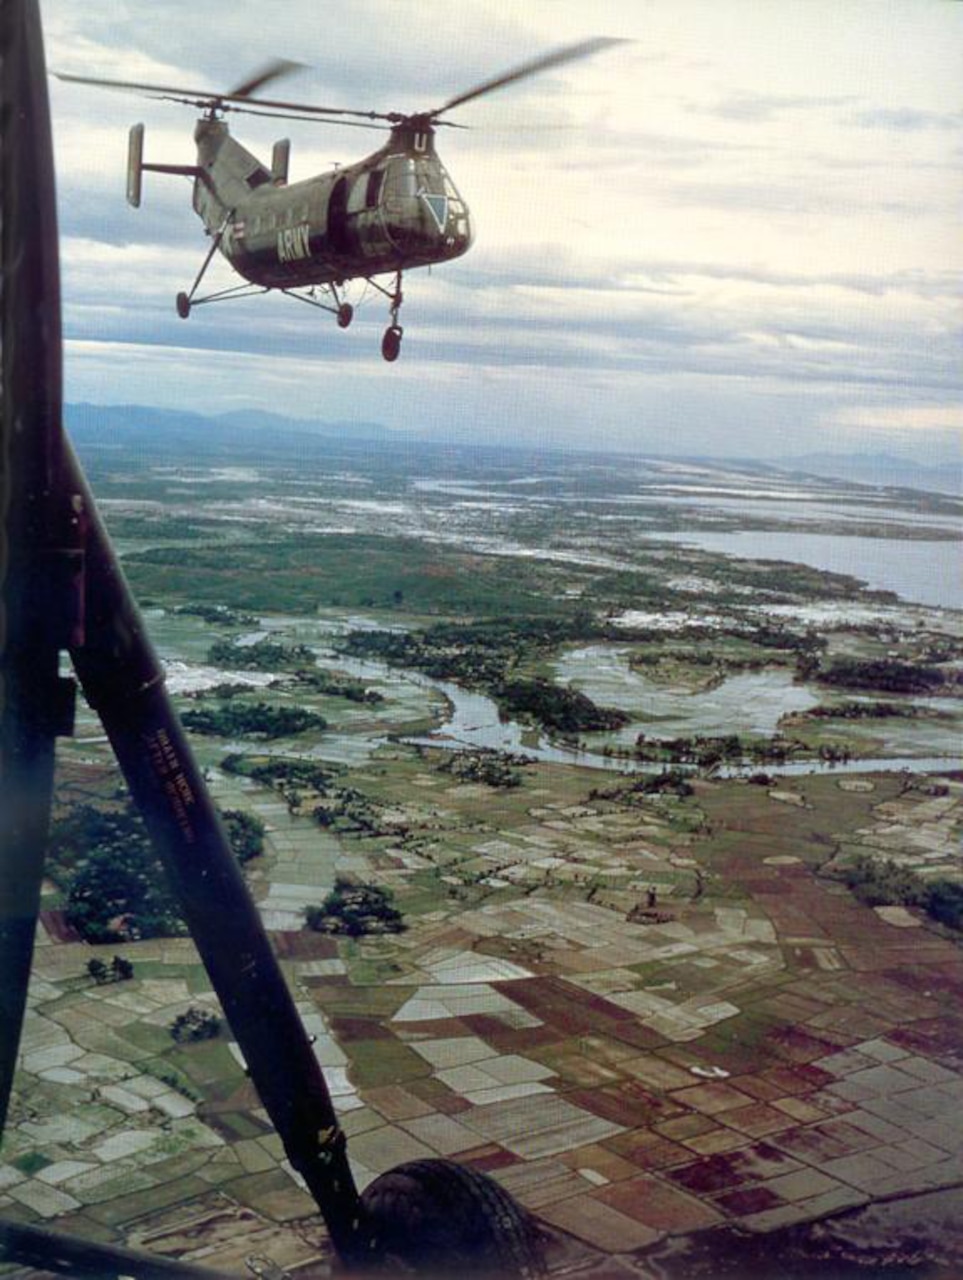 Helicopters fly above fields and bodies of water.